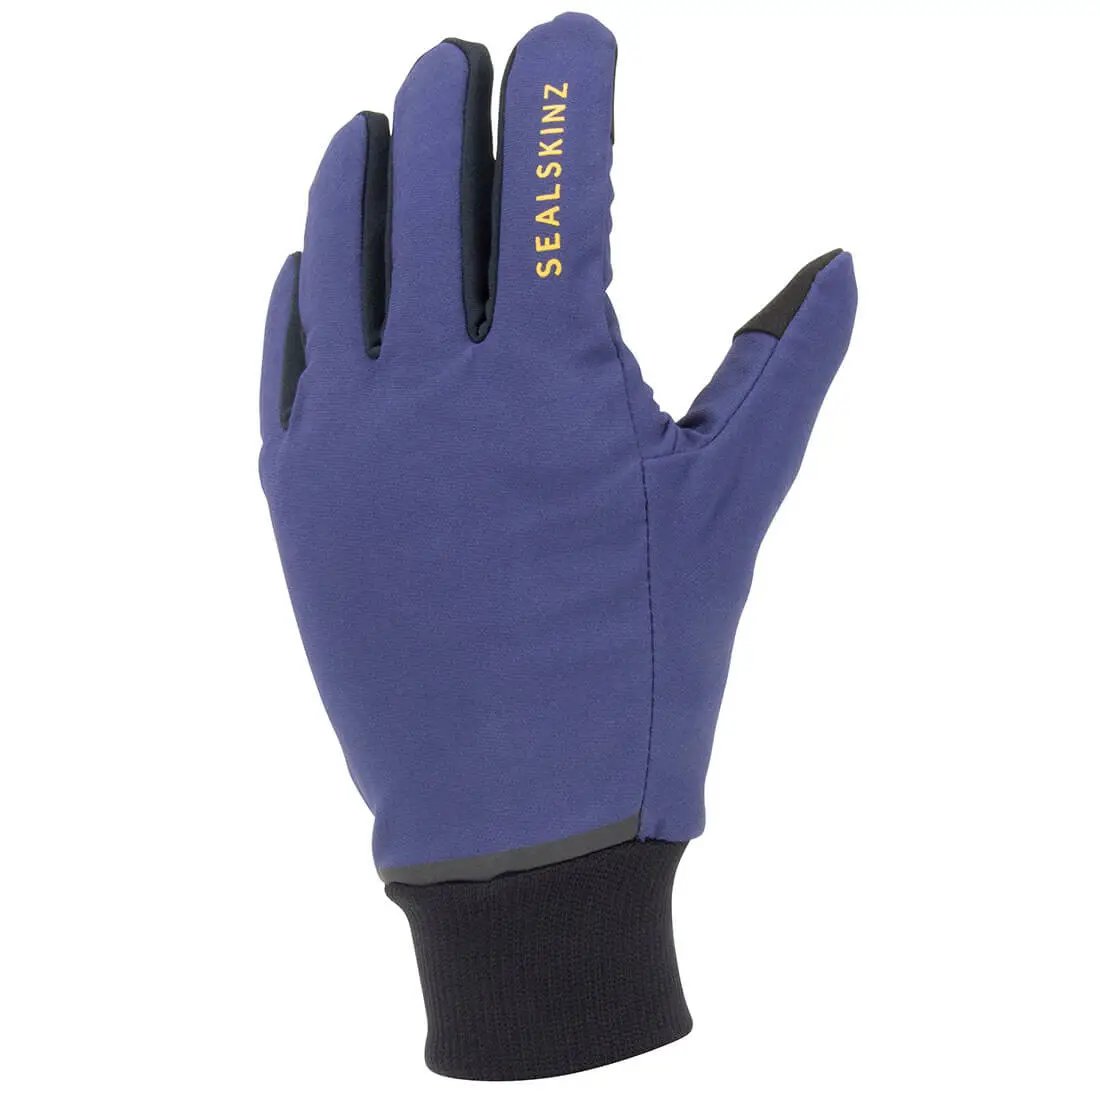 Sealskinz Waterproof All Weather Lightweight Glove with Fusion Control - John Bull Clothing